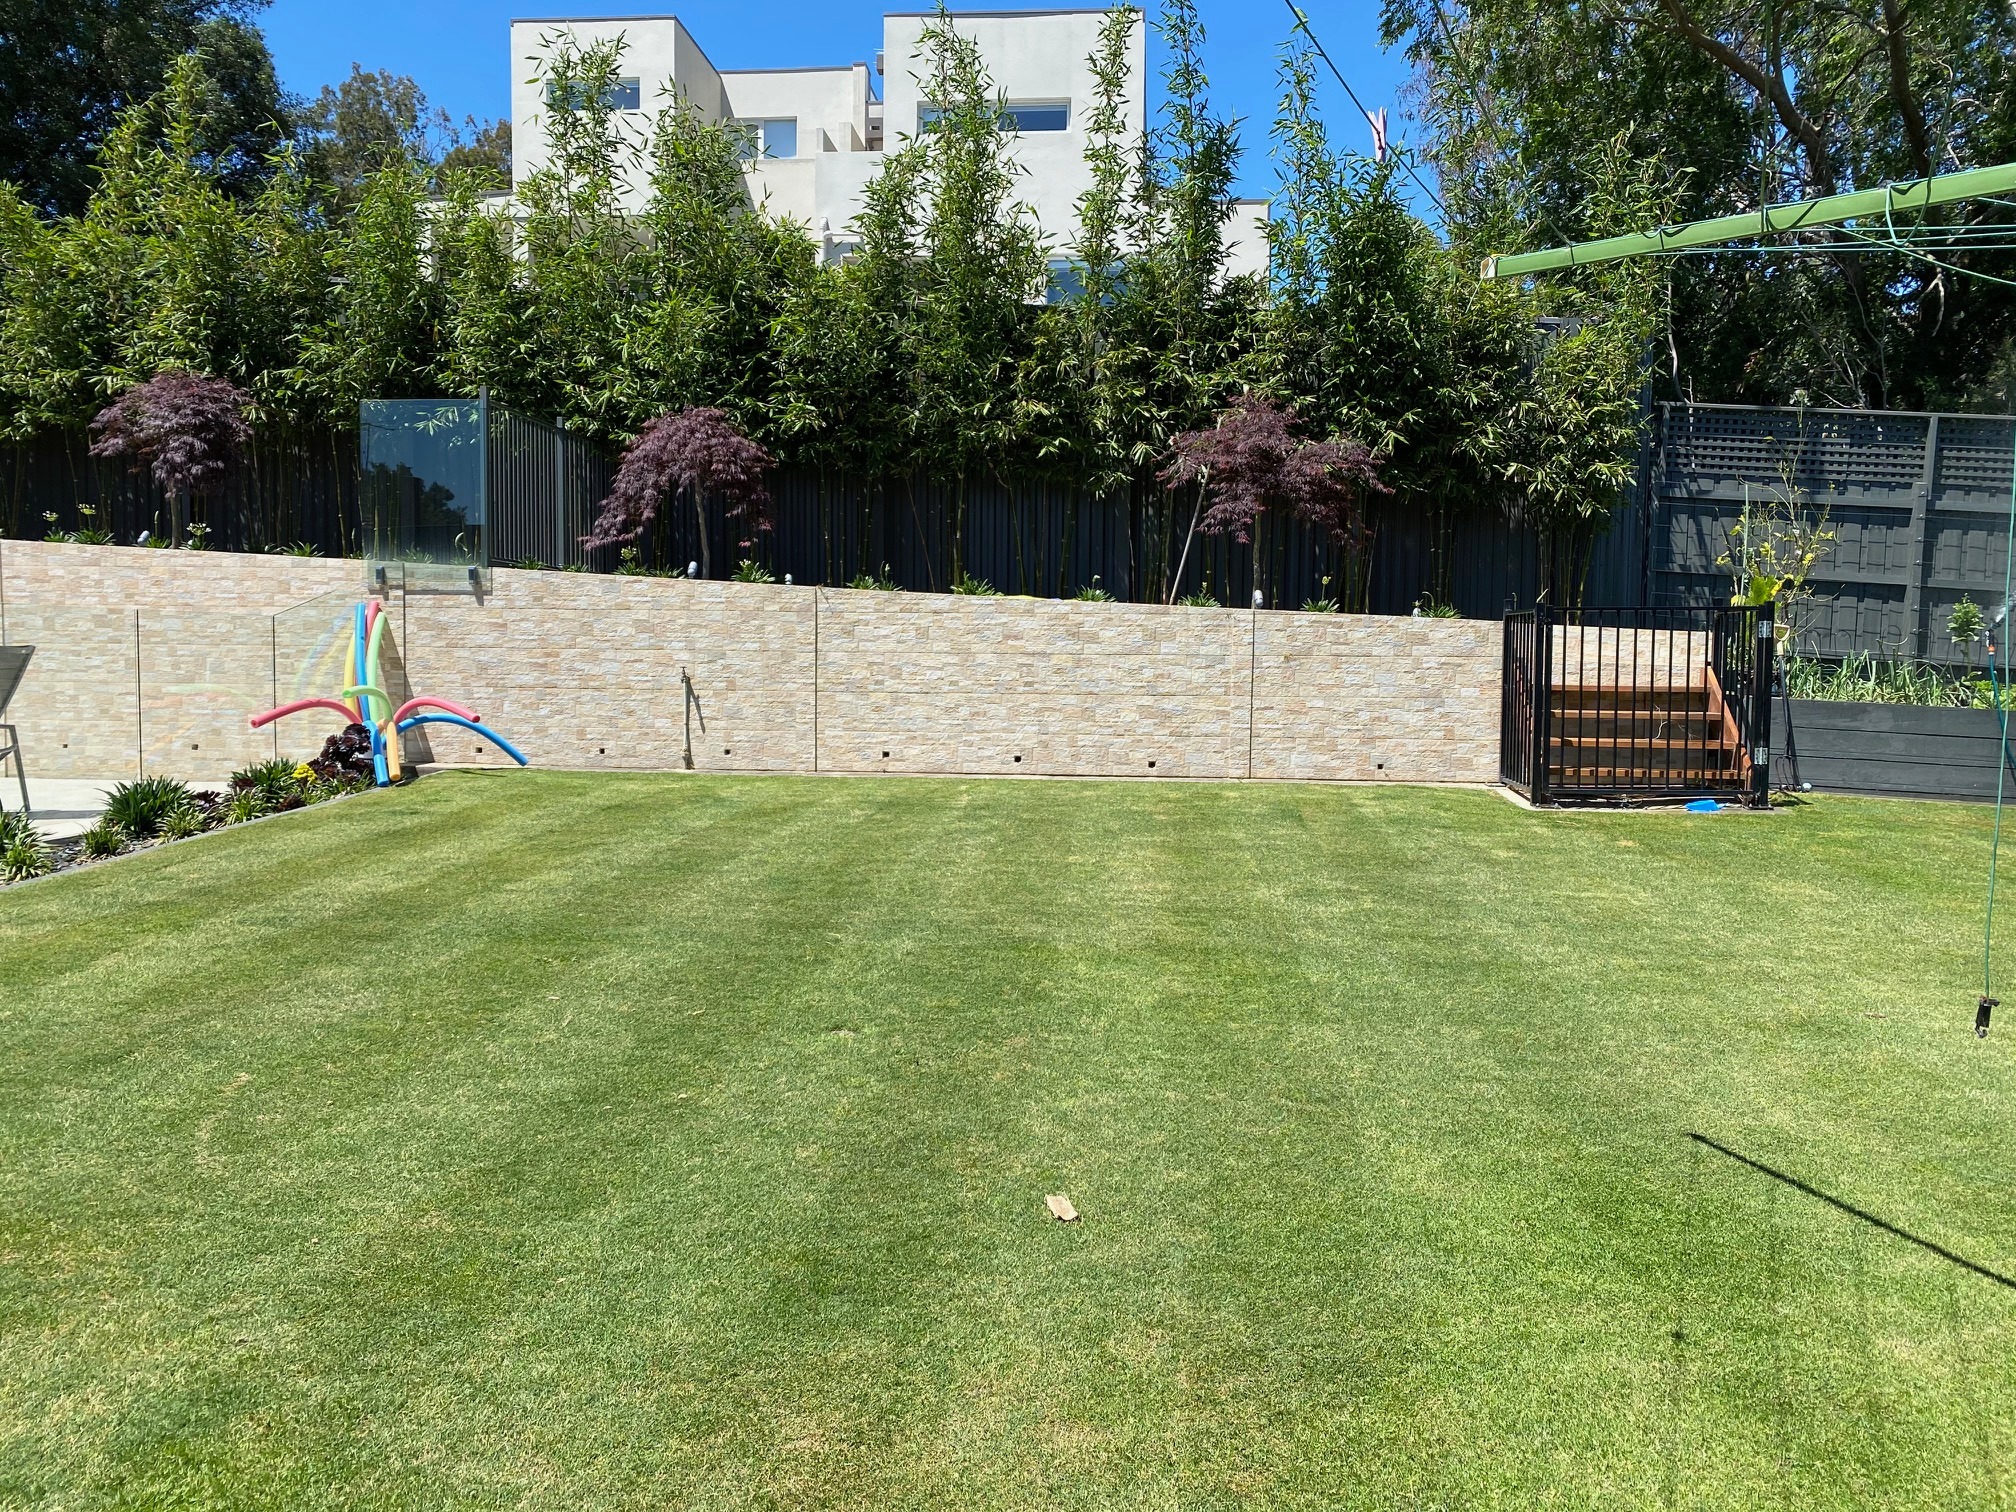 Check out these stunning photos of Oldhamii Bamboo thriving by a backyard pool! 🌿🌱 As time passes, you can see how tall and lush it grows, not only creating a beautiful green landscape but also offering effective privacy screening. 🌿💚 #backyardoasis #bamboobeauty #bamboo #melbourne #gardening #LandscapeDesign